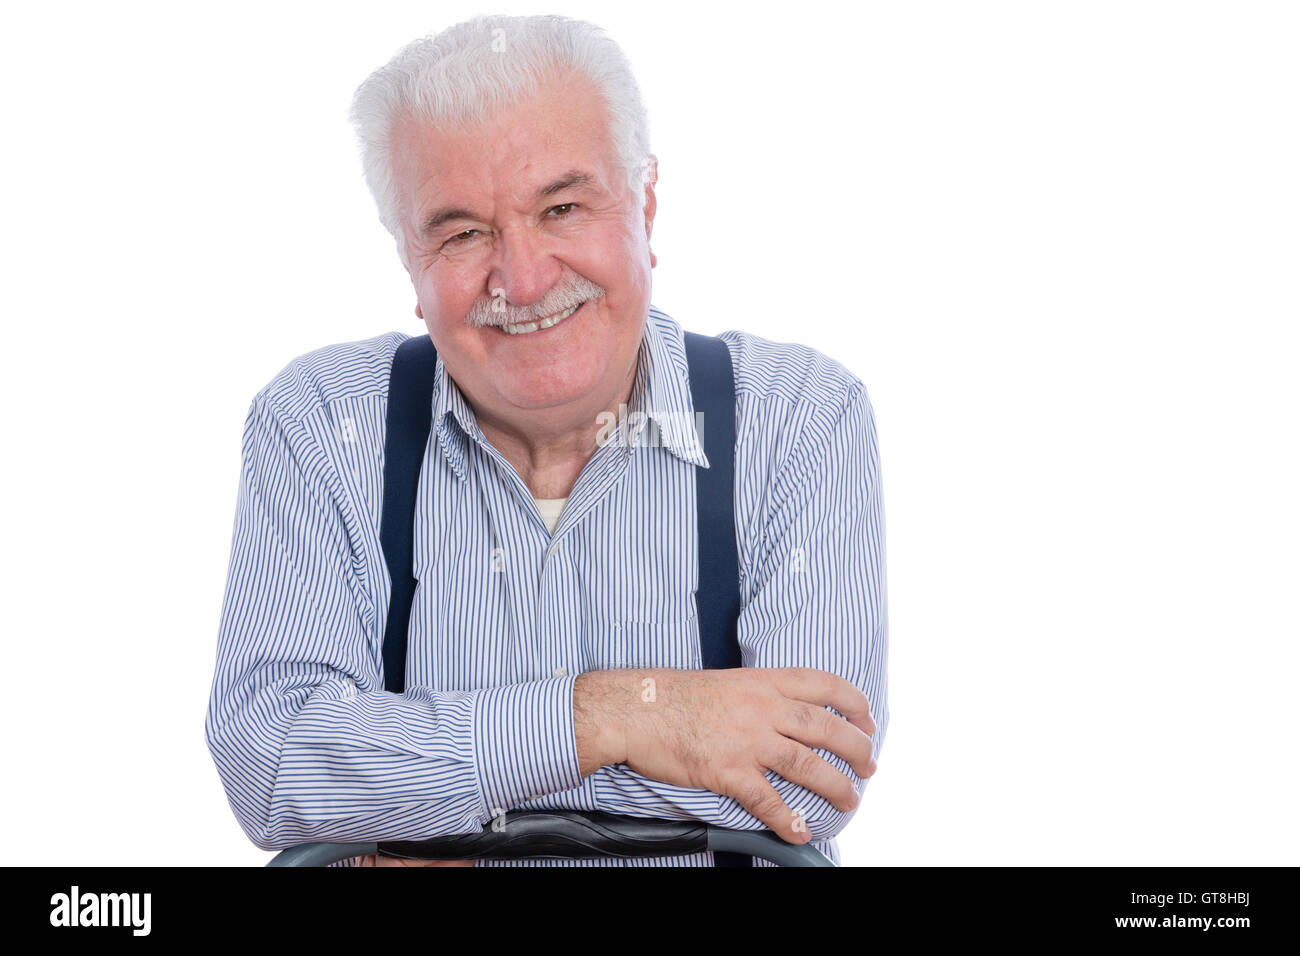 Cute senior man with mustache in white striped shirt and blue suspenders with joyful expression and folded arms over white backg Stock Photo